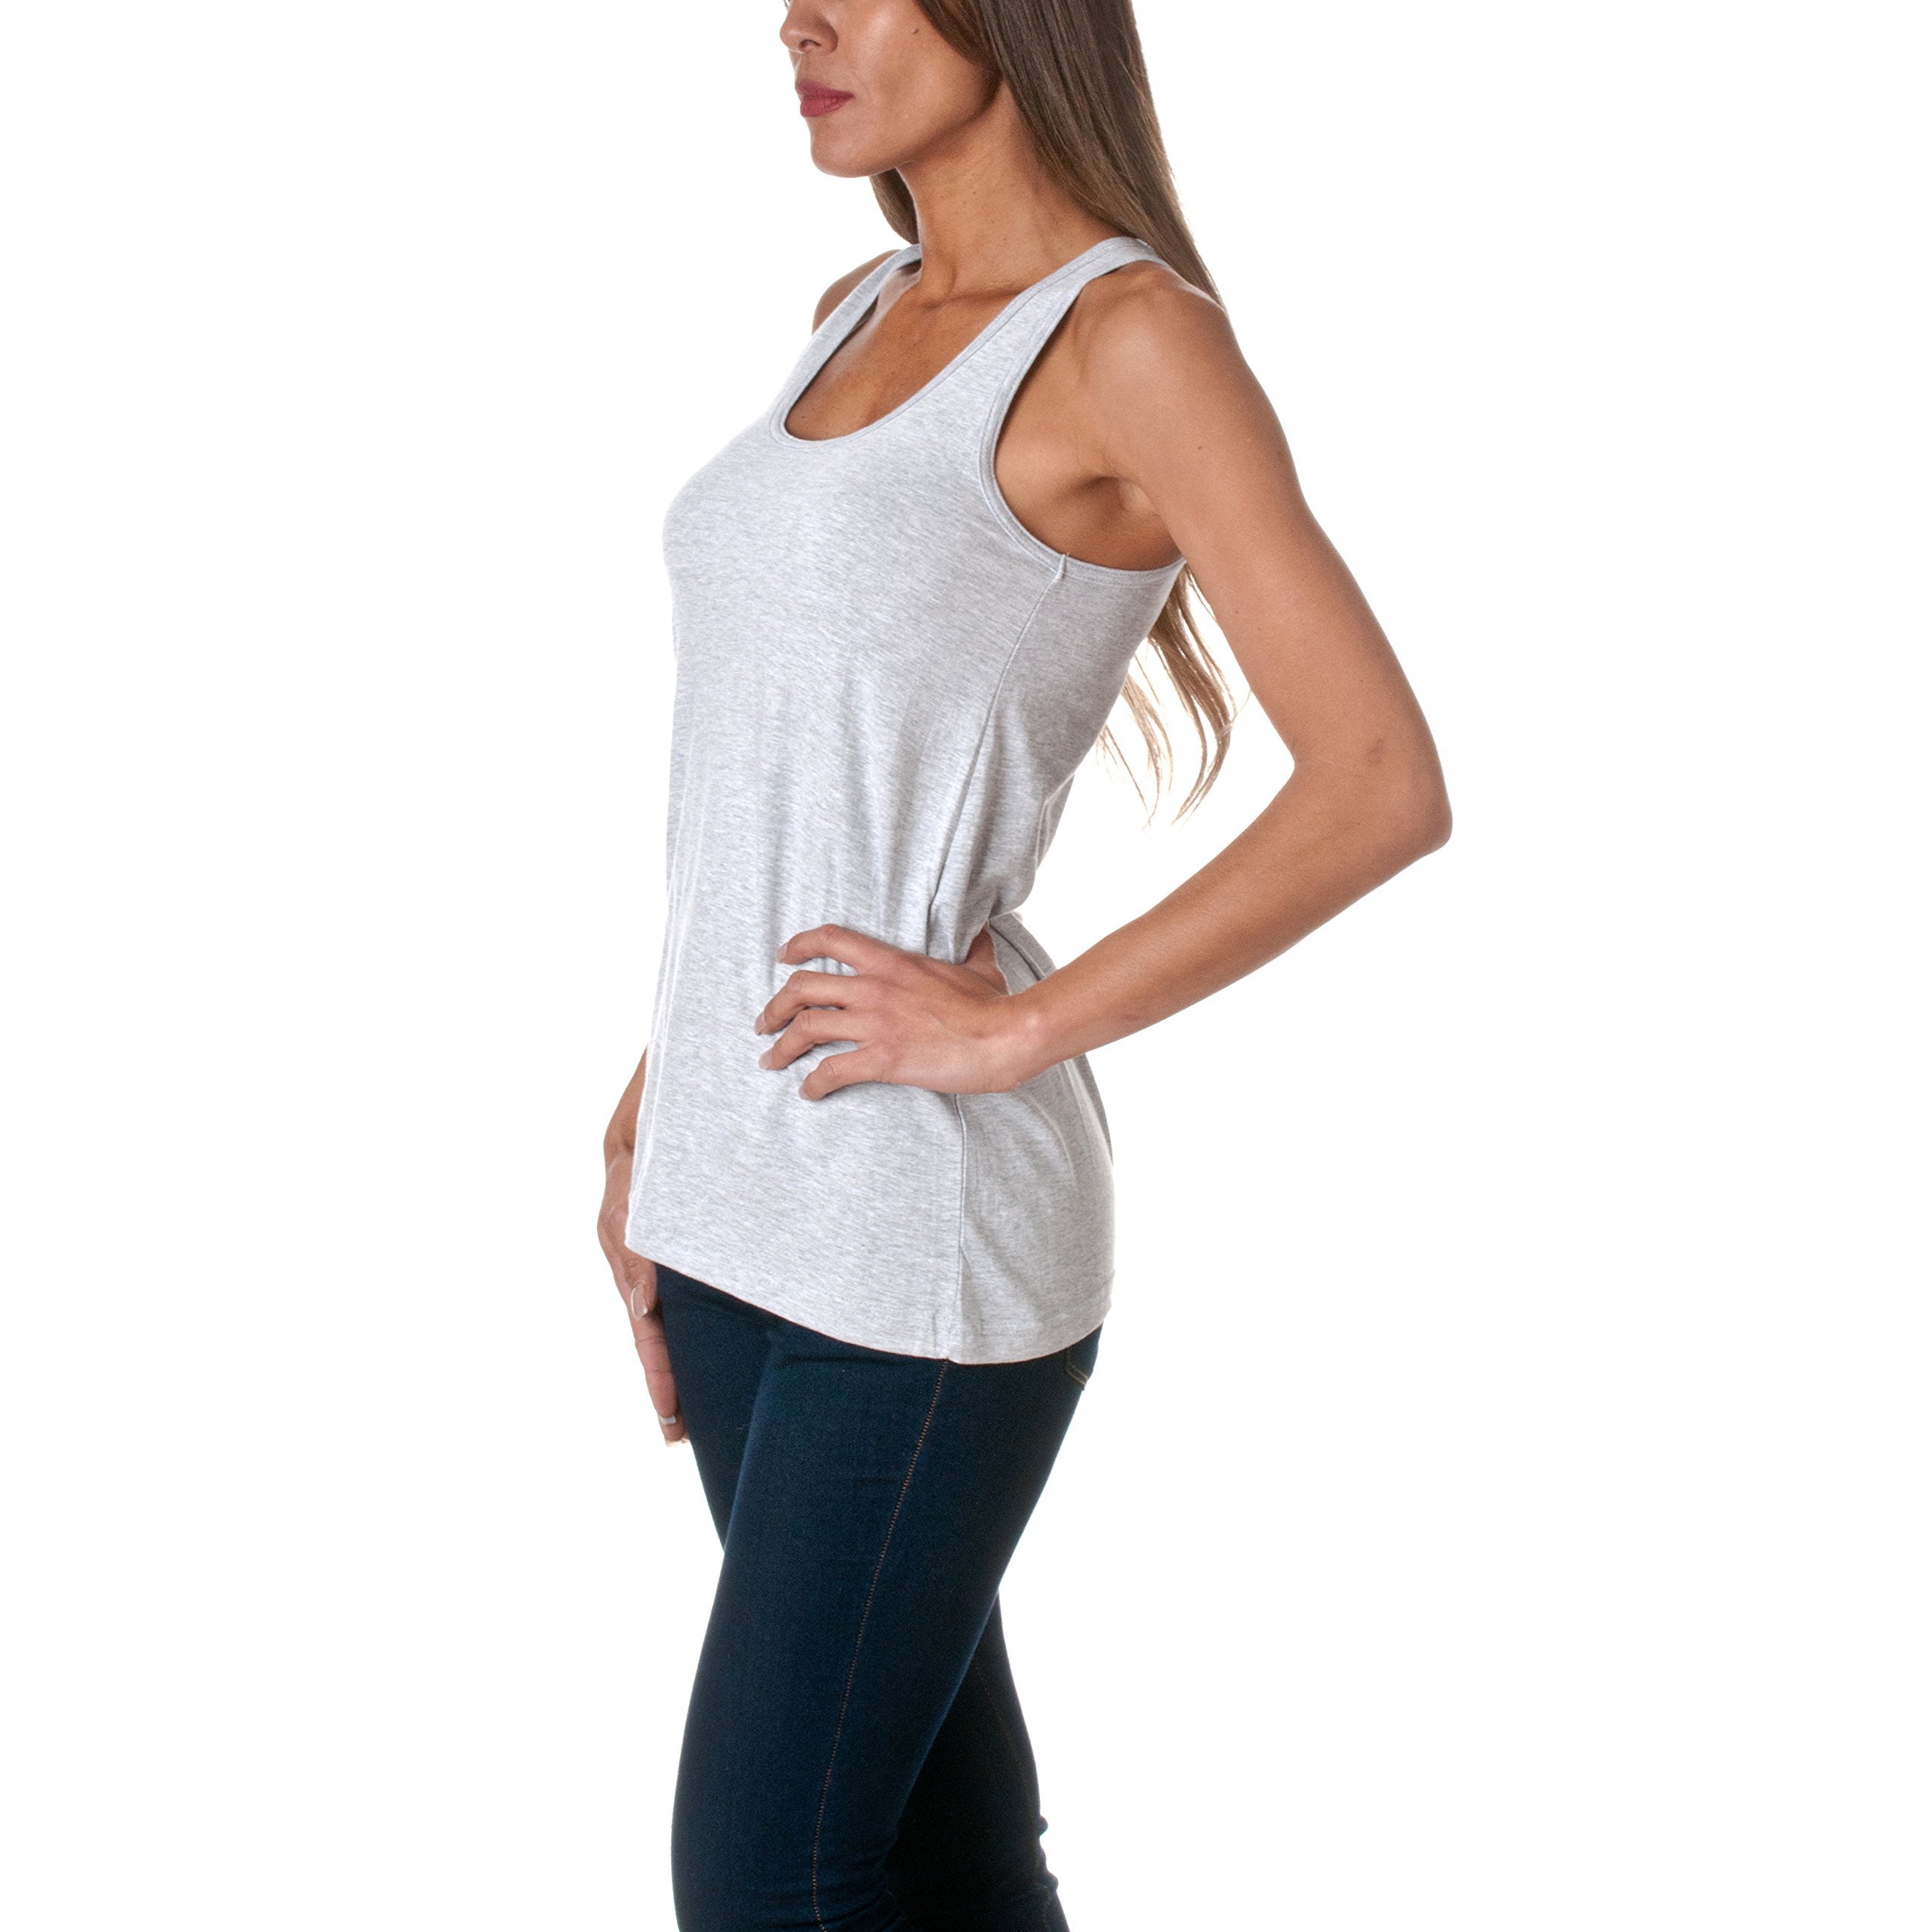 Sofra Women's Loose Fit Tank Top Relaxed Flowy-Medium-Gray